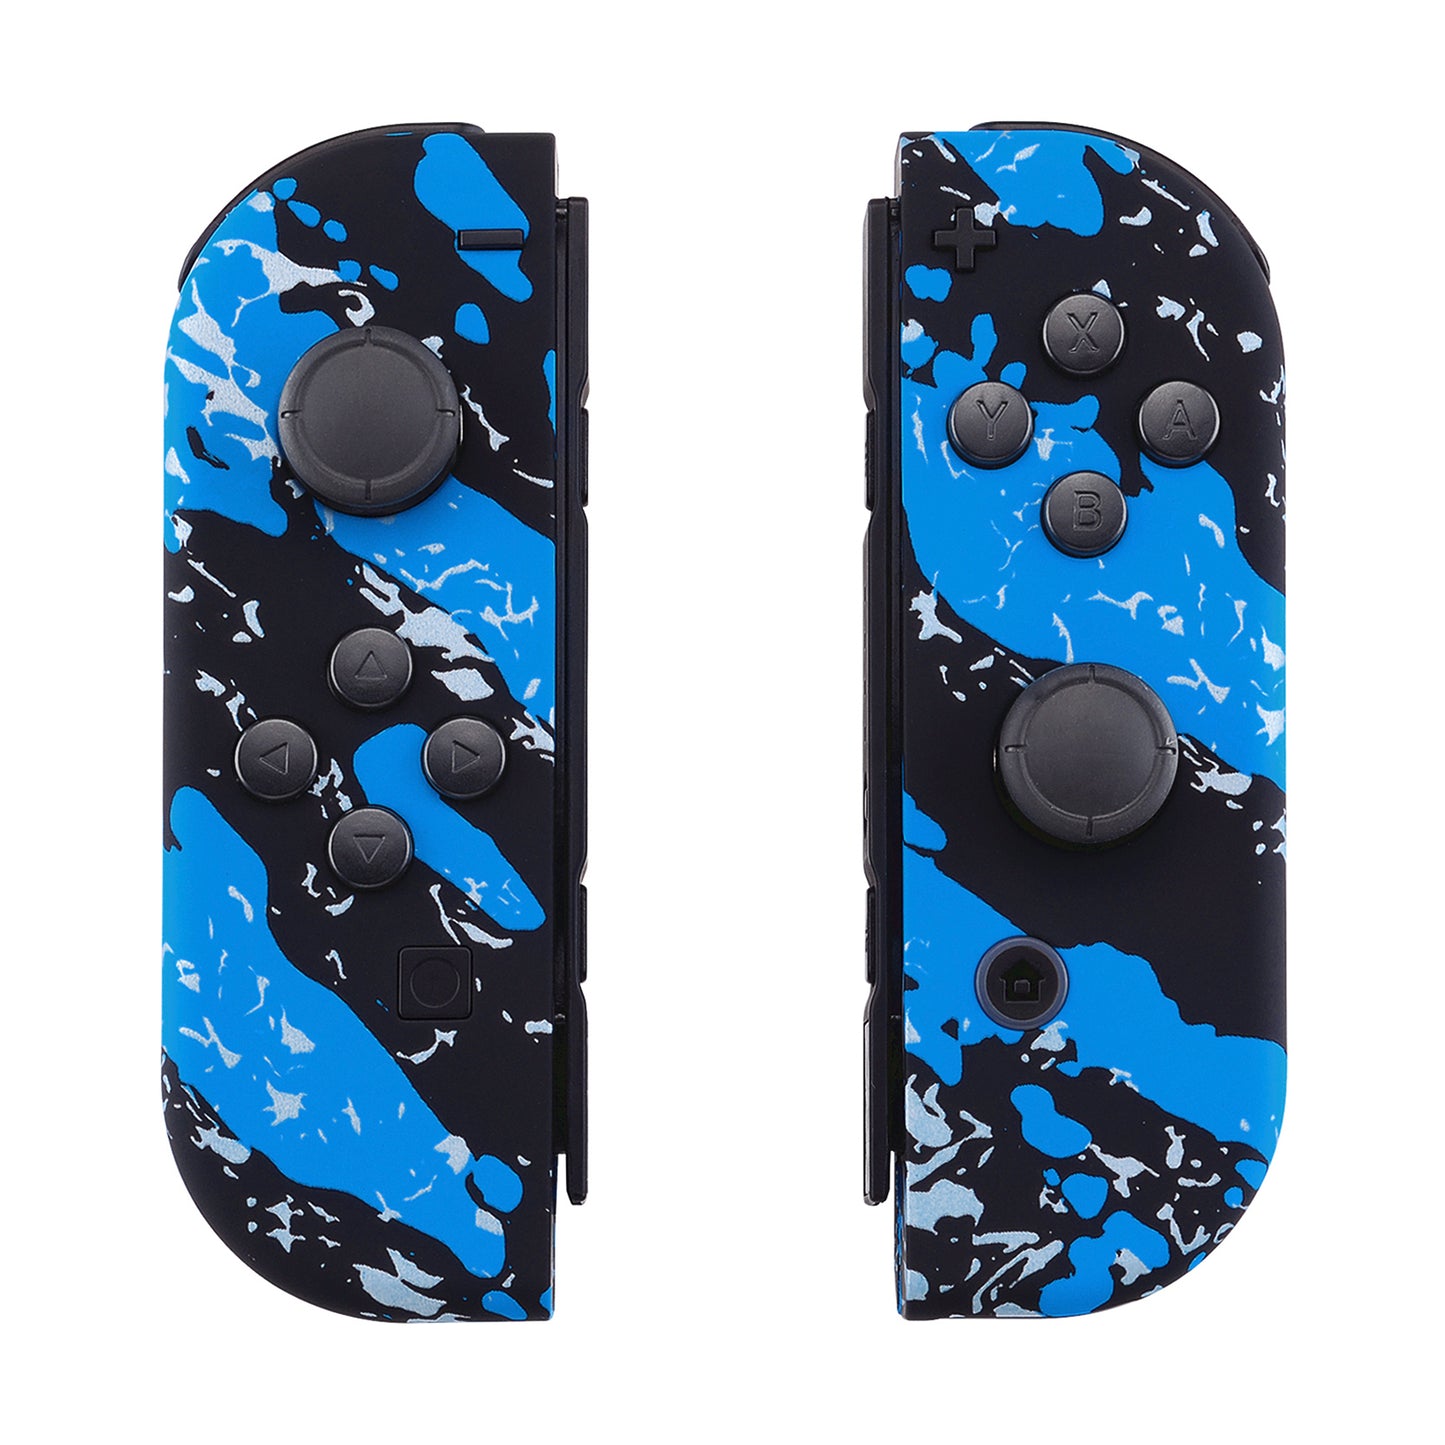 eXtremeRate Replacement Full Set Shell Case with Buttons for Joycon of NS Switch - Blue Coating Splash Patterned eXtremeRate